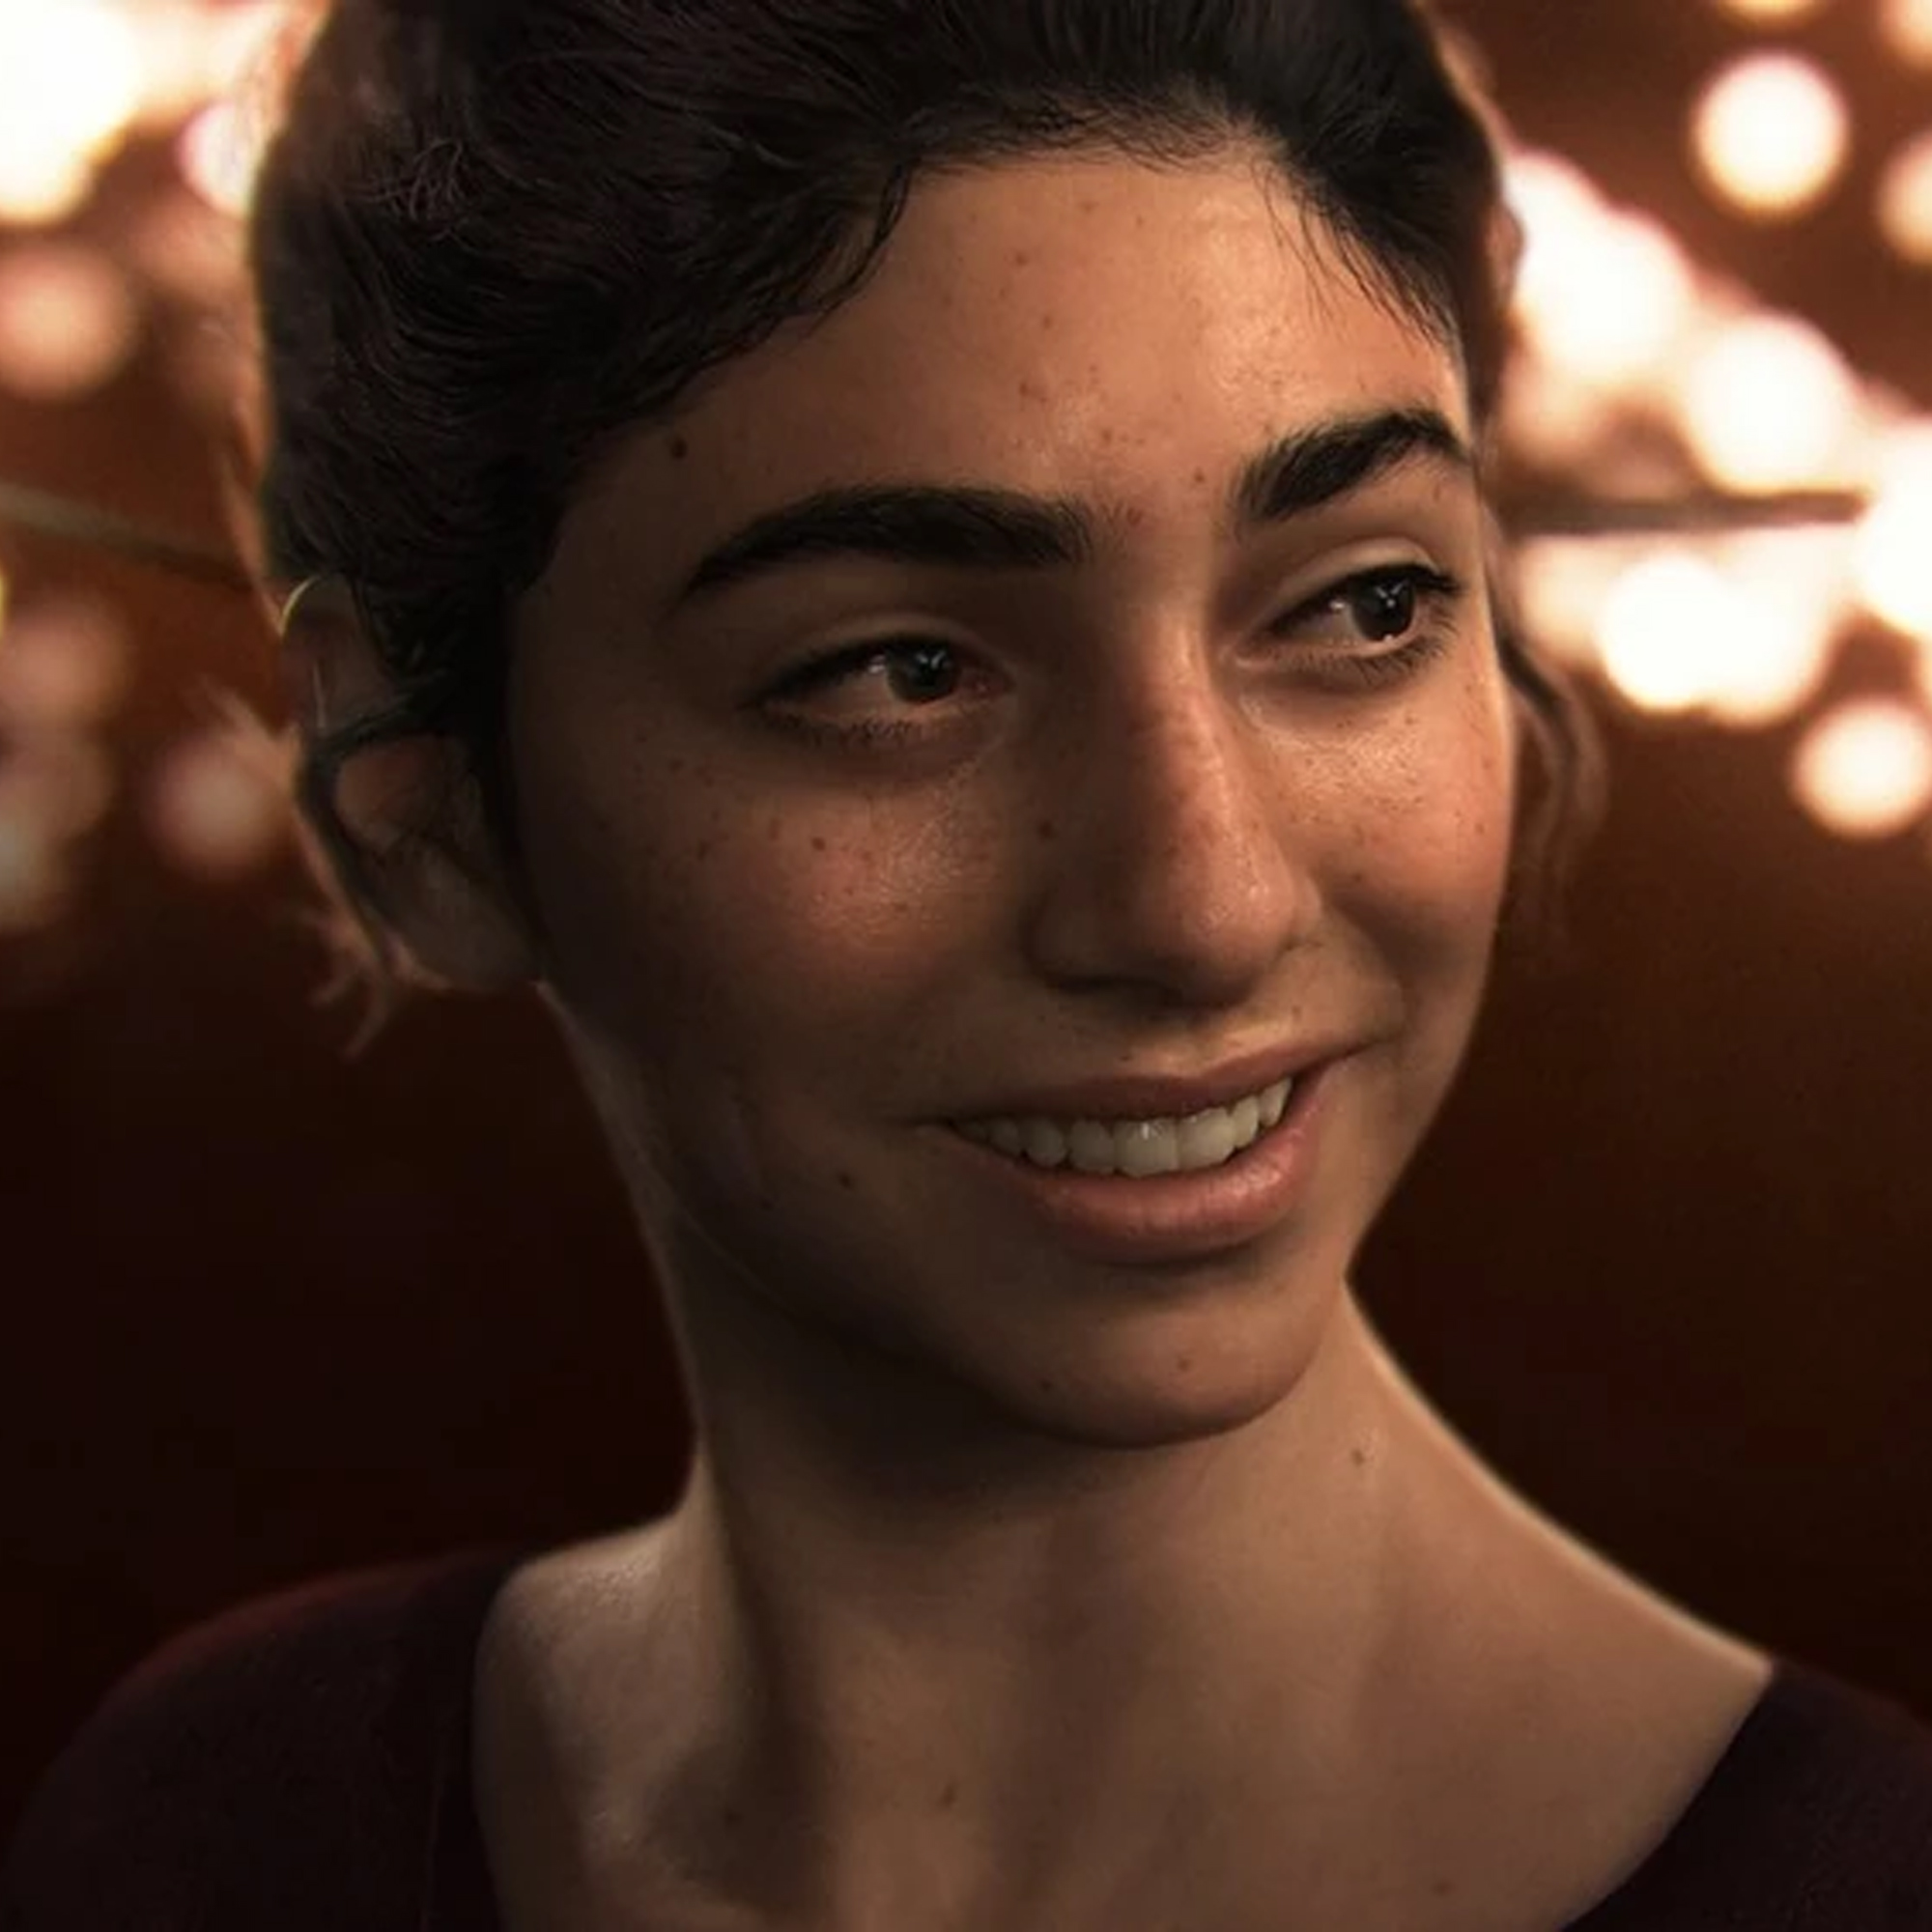 This Dina look-a-like wants to play the character in The Last of